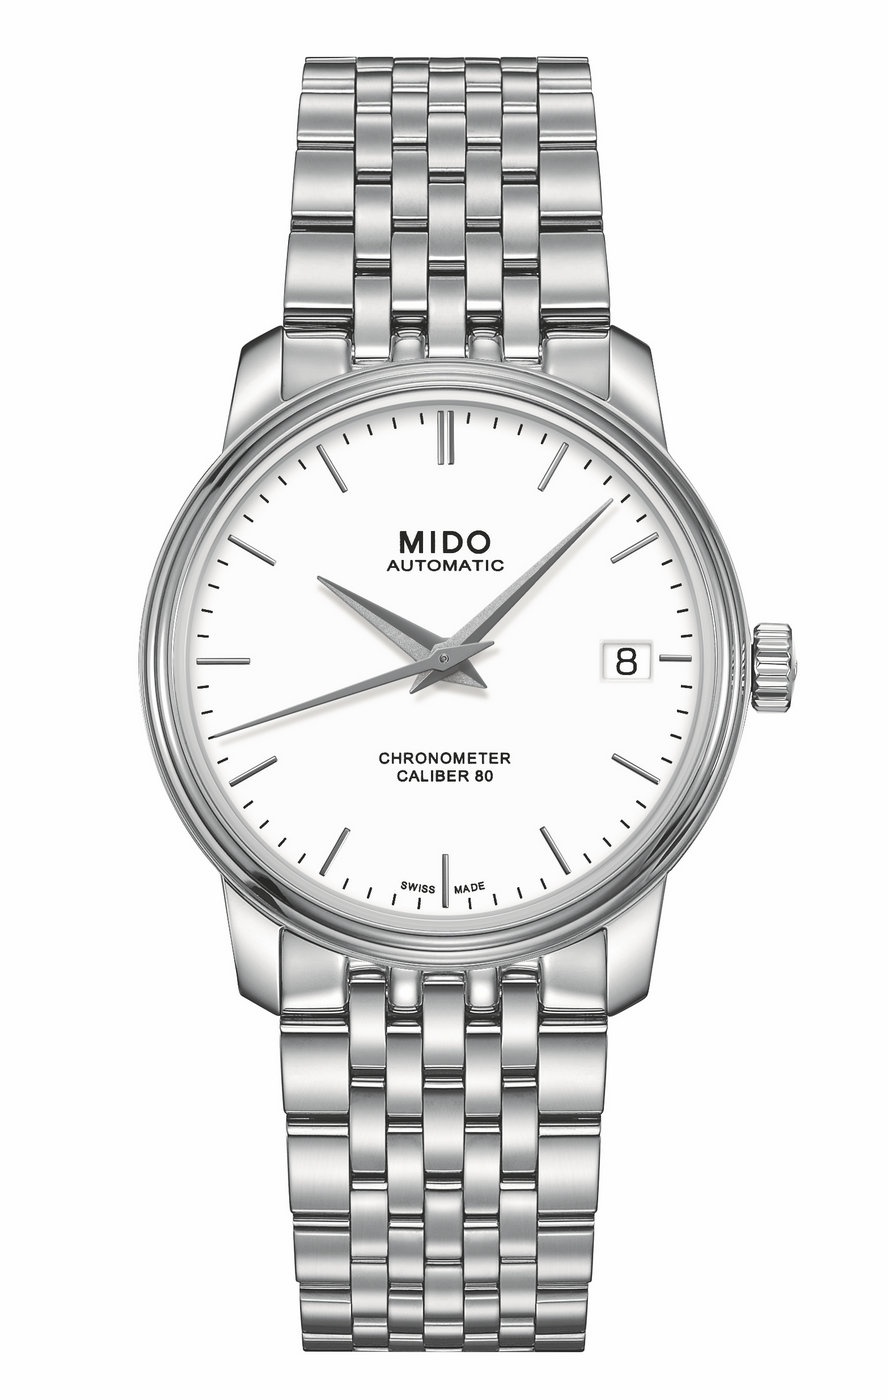 Swiss Mido Beirut Seir series watch market listed first equipped with Si Haomi Si Observatory certification Caliber 80 long kinetic energy storage watch